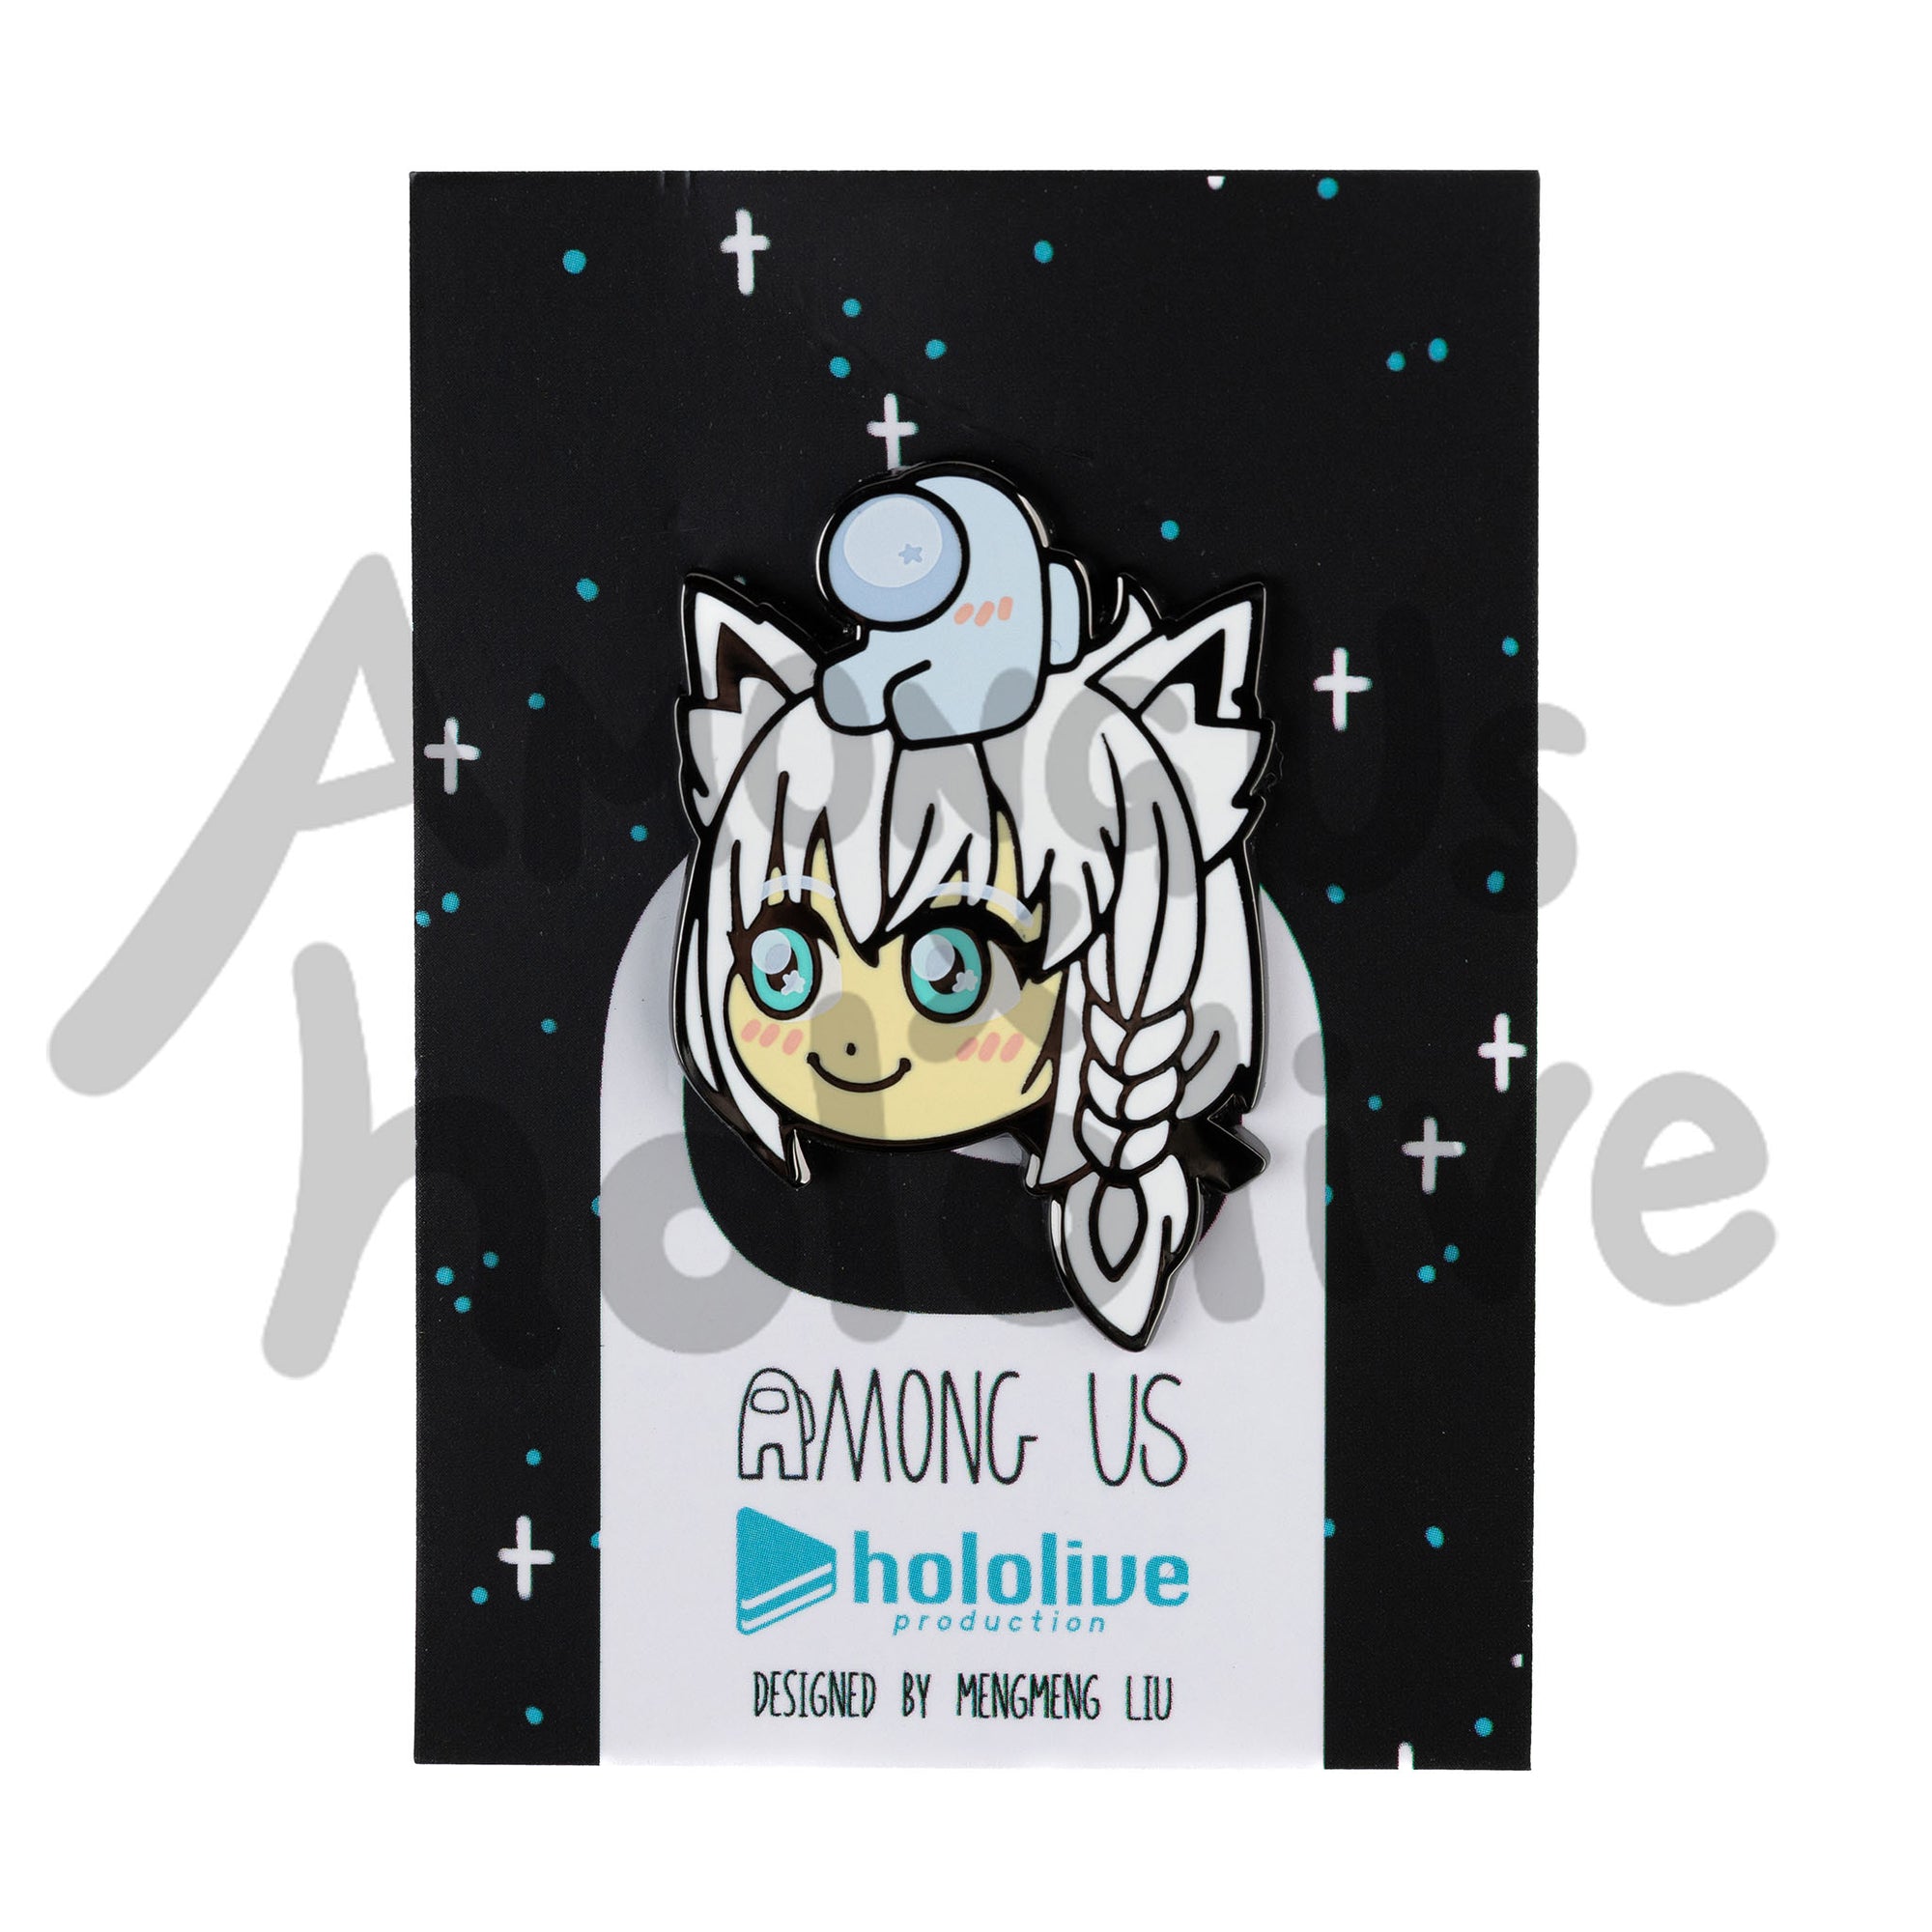 Enamel Pin of Shirakami Fubuki's Face from Hololive. Fubuki has fair skin, teal sparkly eyes, and white braided hair with matching white cat ears. There's a Light Blue Crewmate sitting atop her head. Both characters have pink blush marks on their faces.